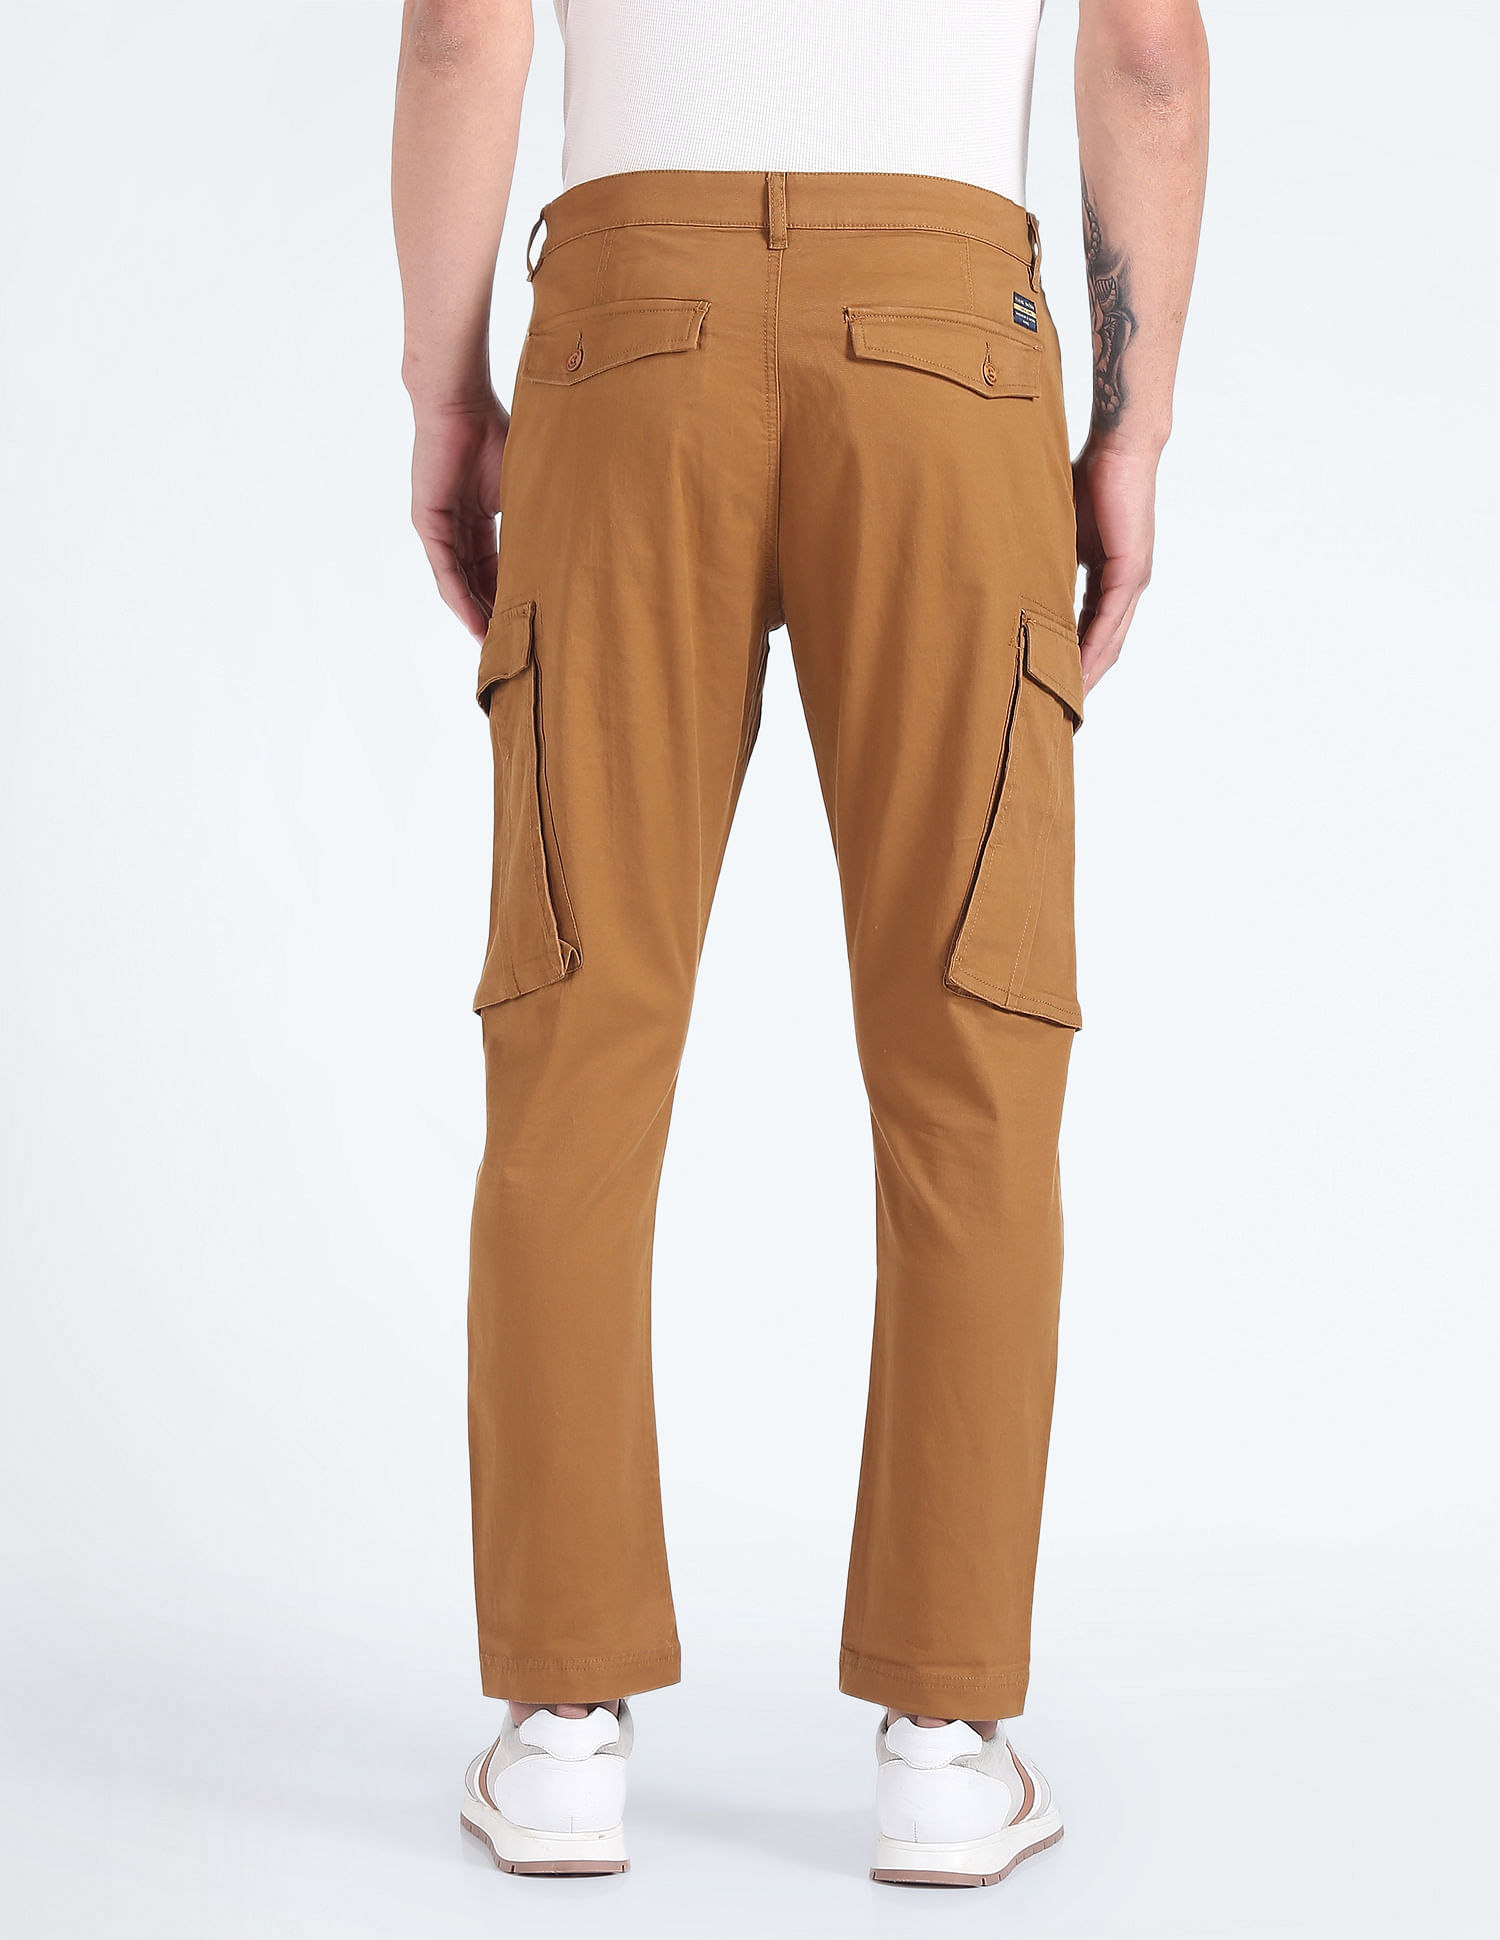 Buy Flying Machine Navy Slim Cargo Trousers - Trousers for Men 1333693 |  Myntra